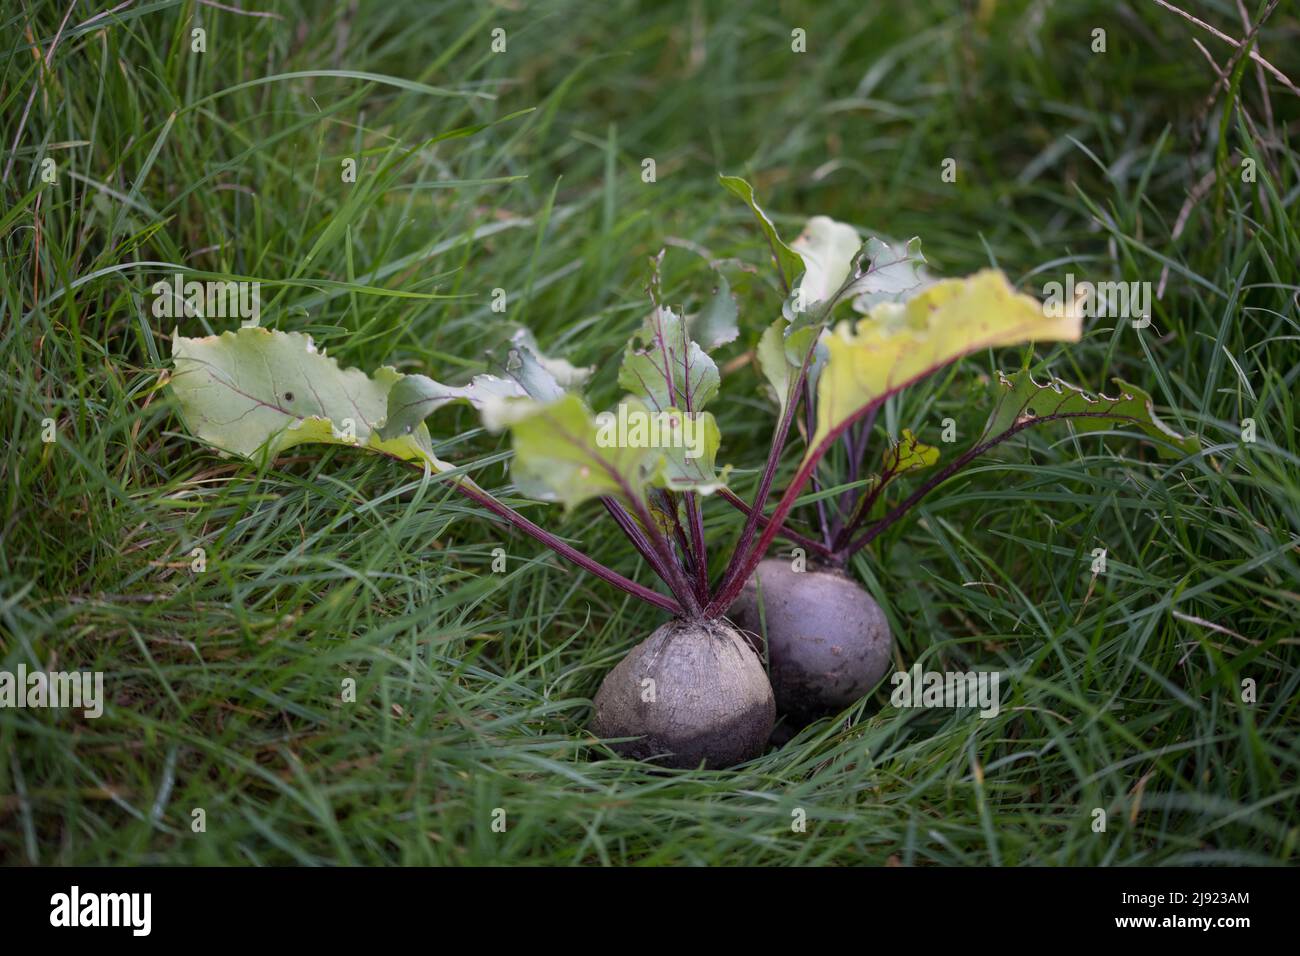 Beetroot (Amaranthaceae), lying freshly harvested in the grass in the garden, Velbert, Germany Stock Photo